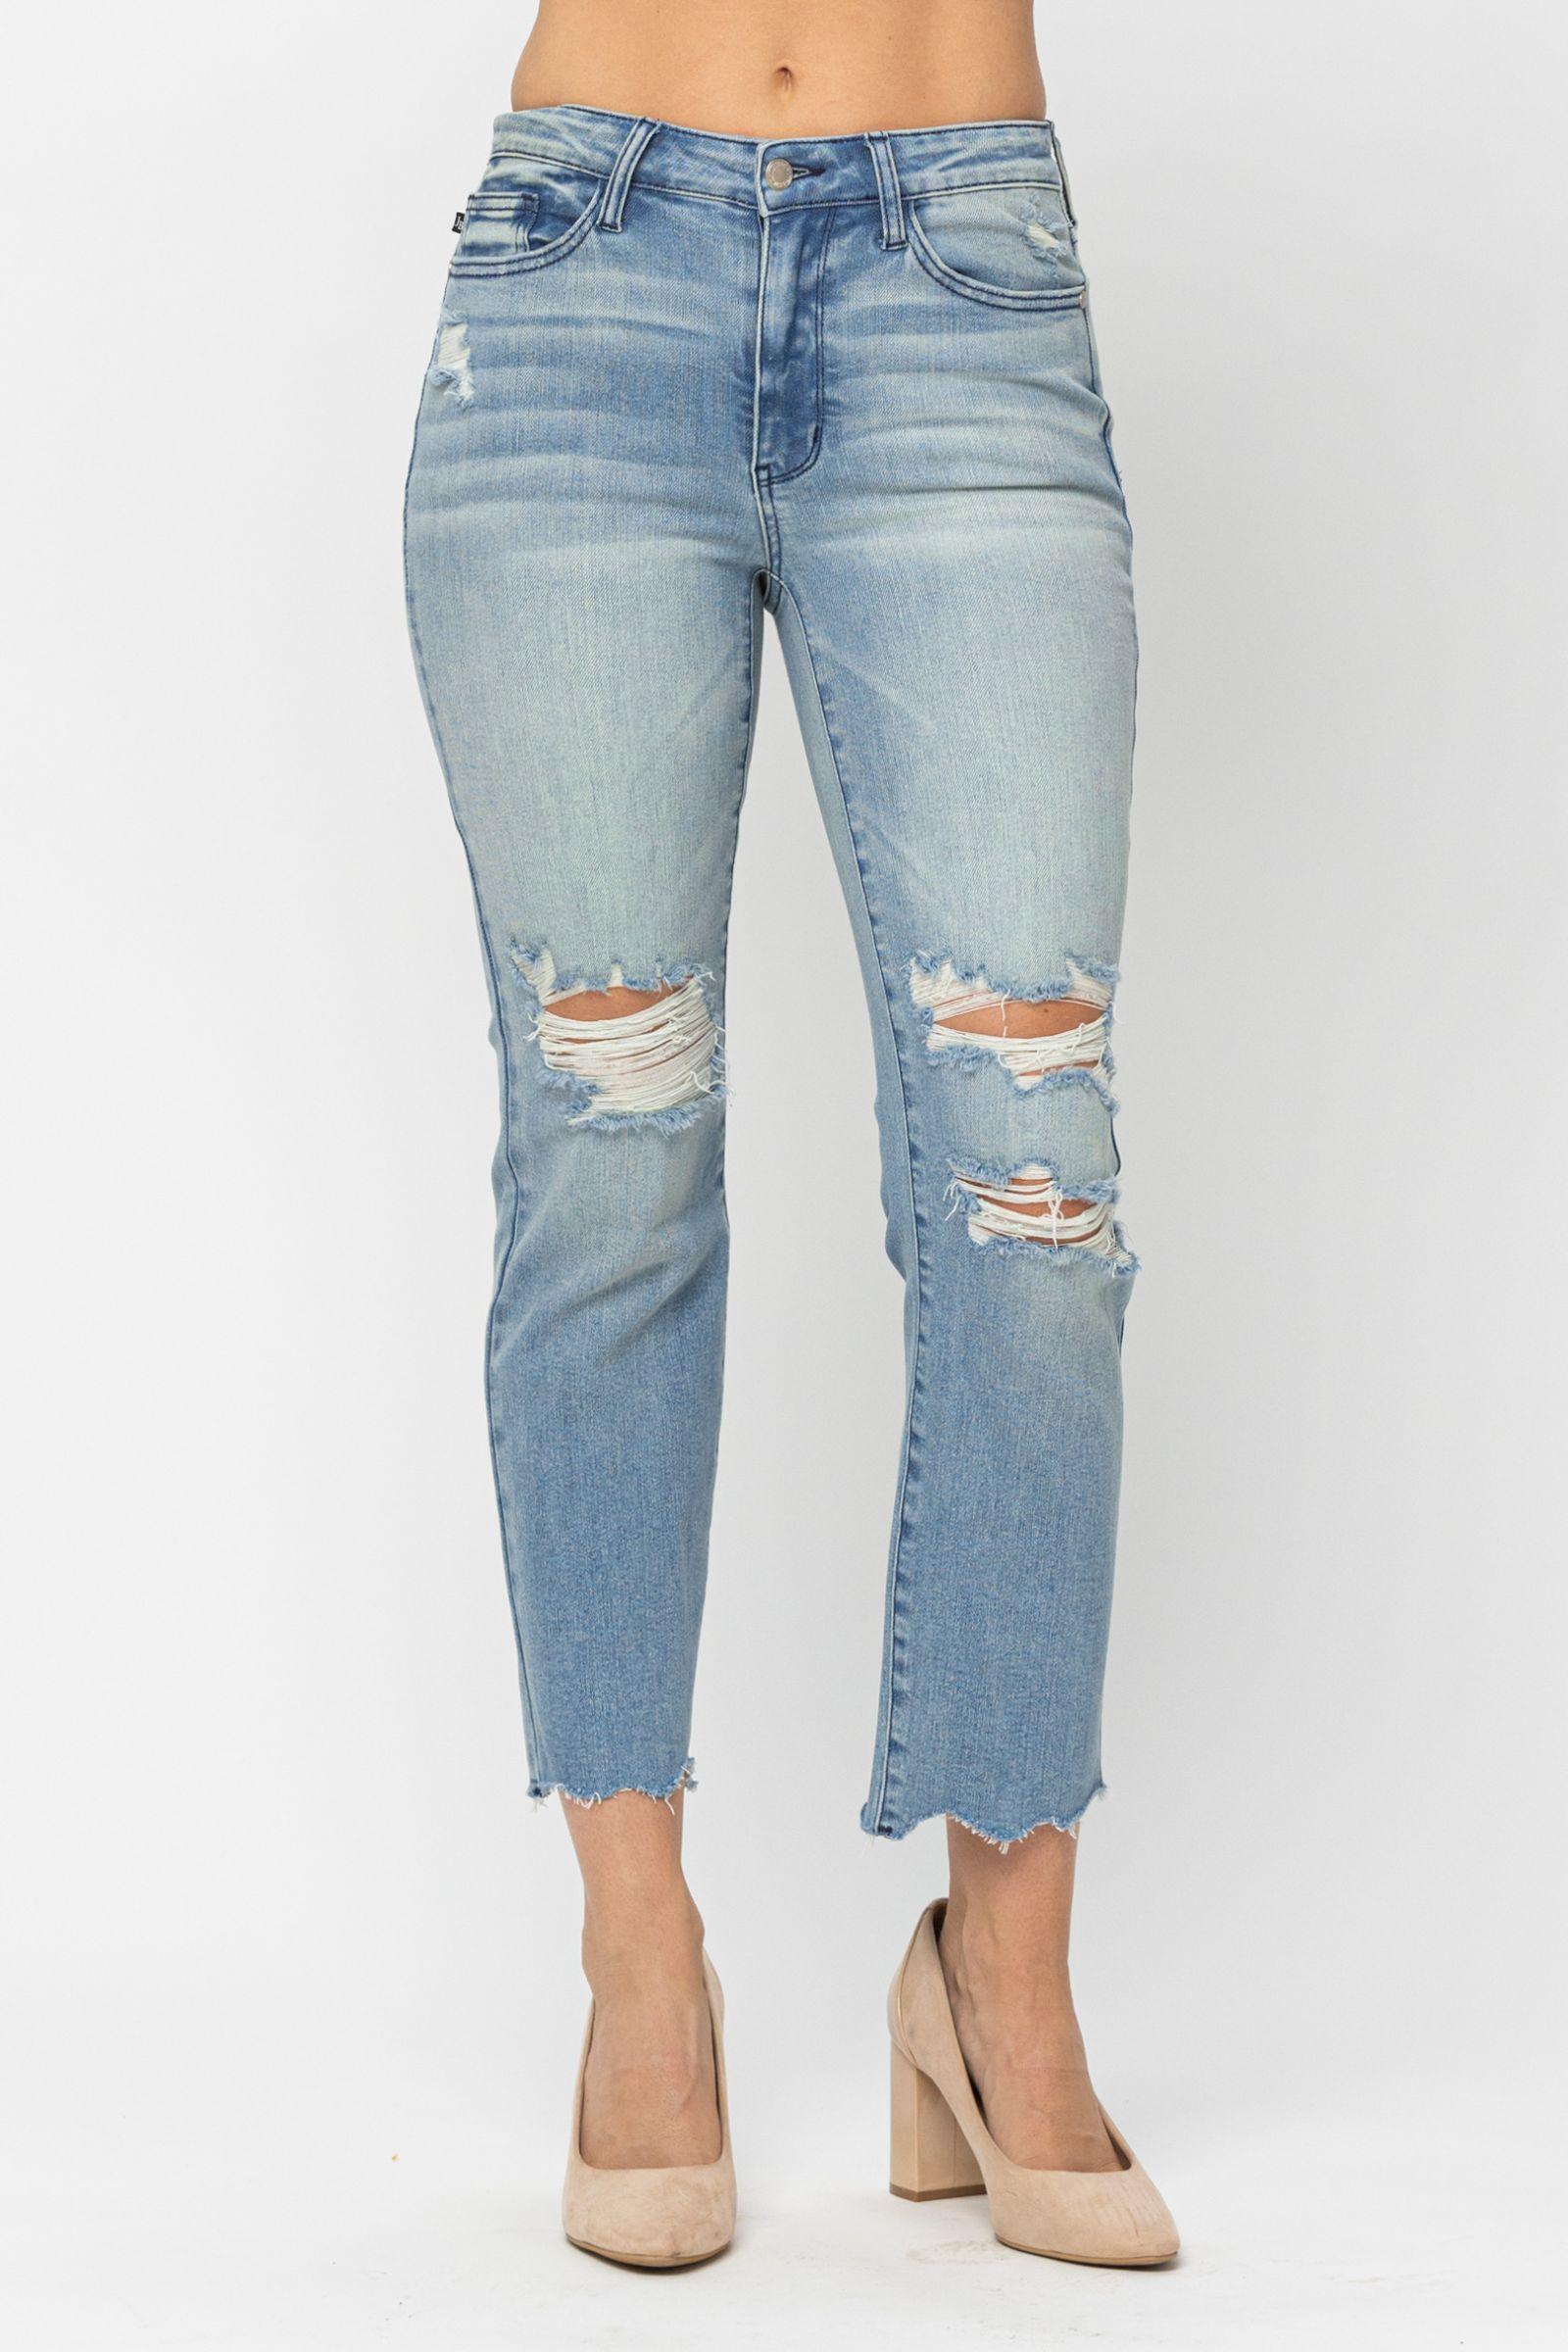 Judy Blue Mid-Rise Crop Straight - Strawberry Moon Boutique